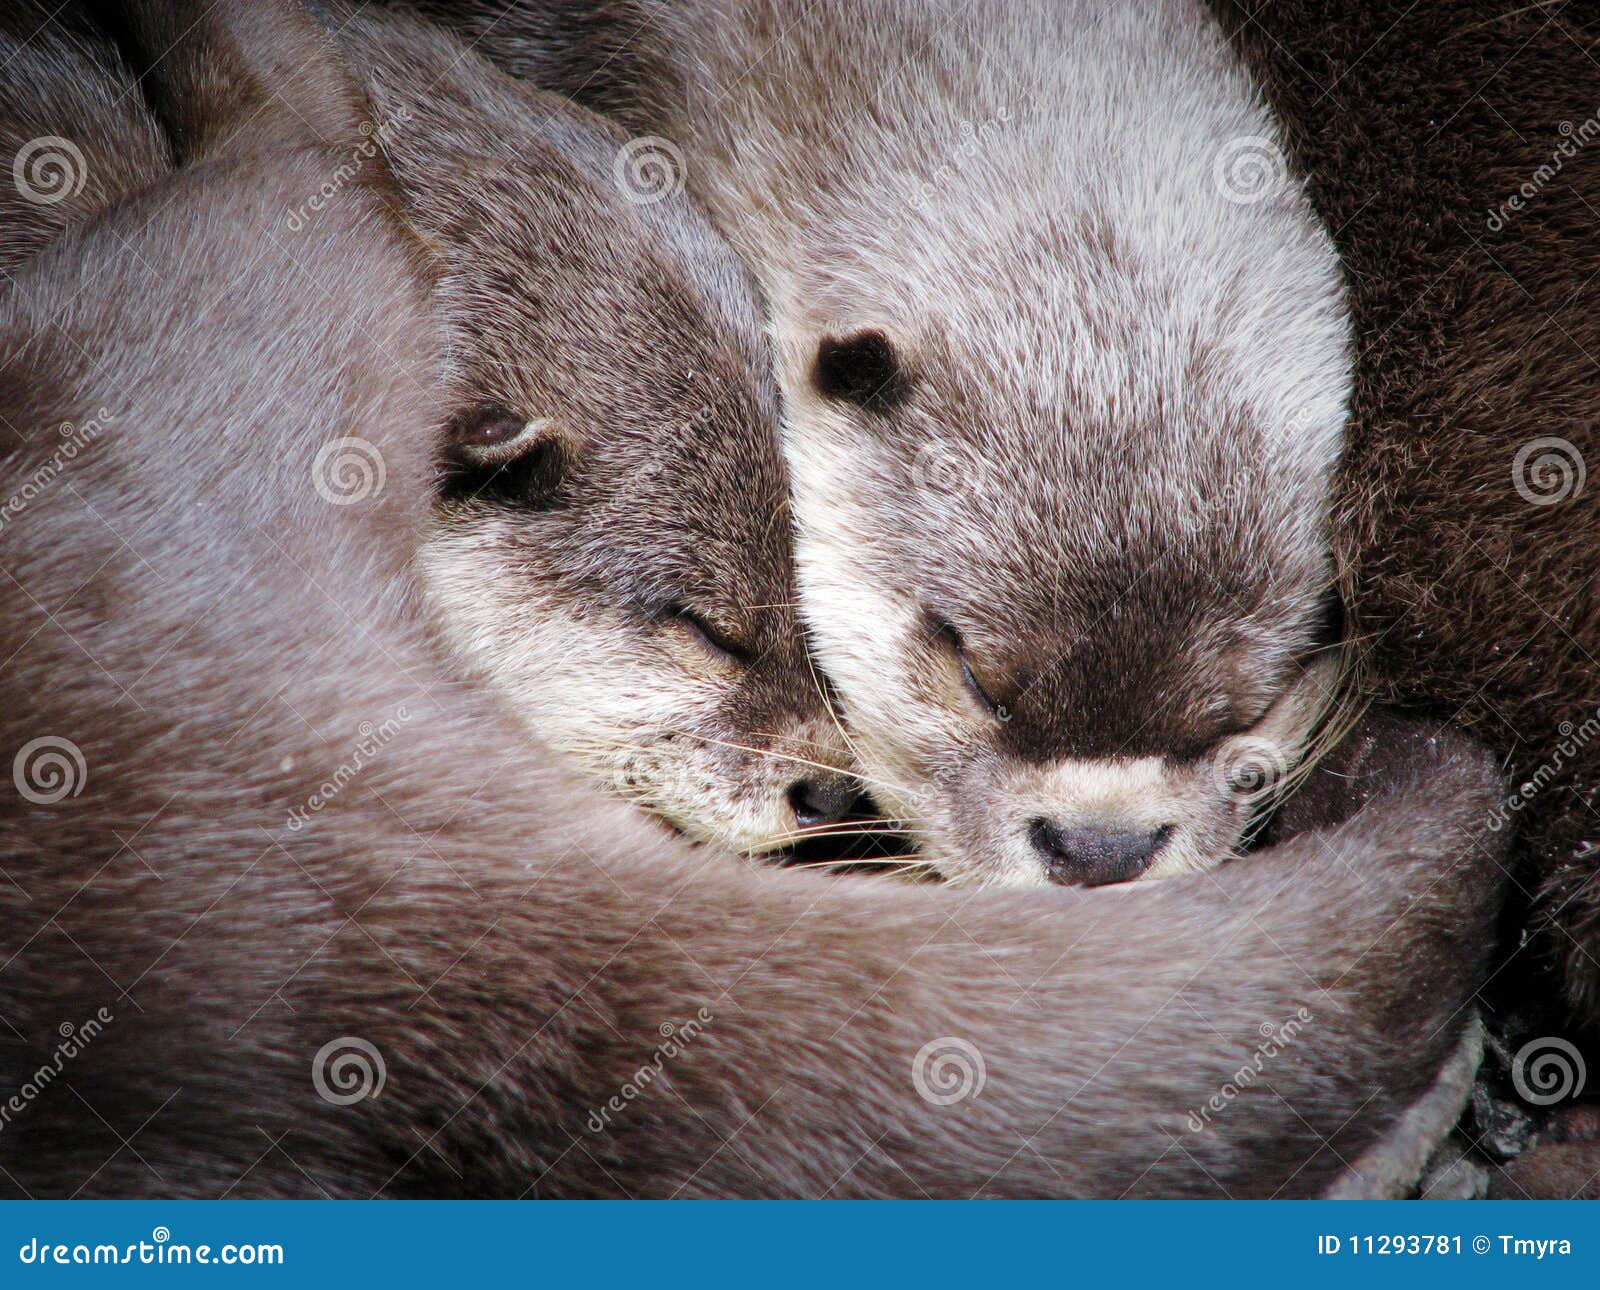 4,817 Animals Hugging Stock Photos - Free & Royalty-Free Stock Photos from  Dreamstime